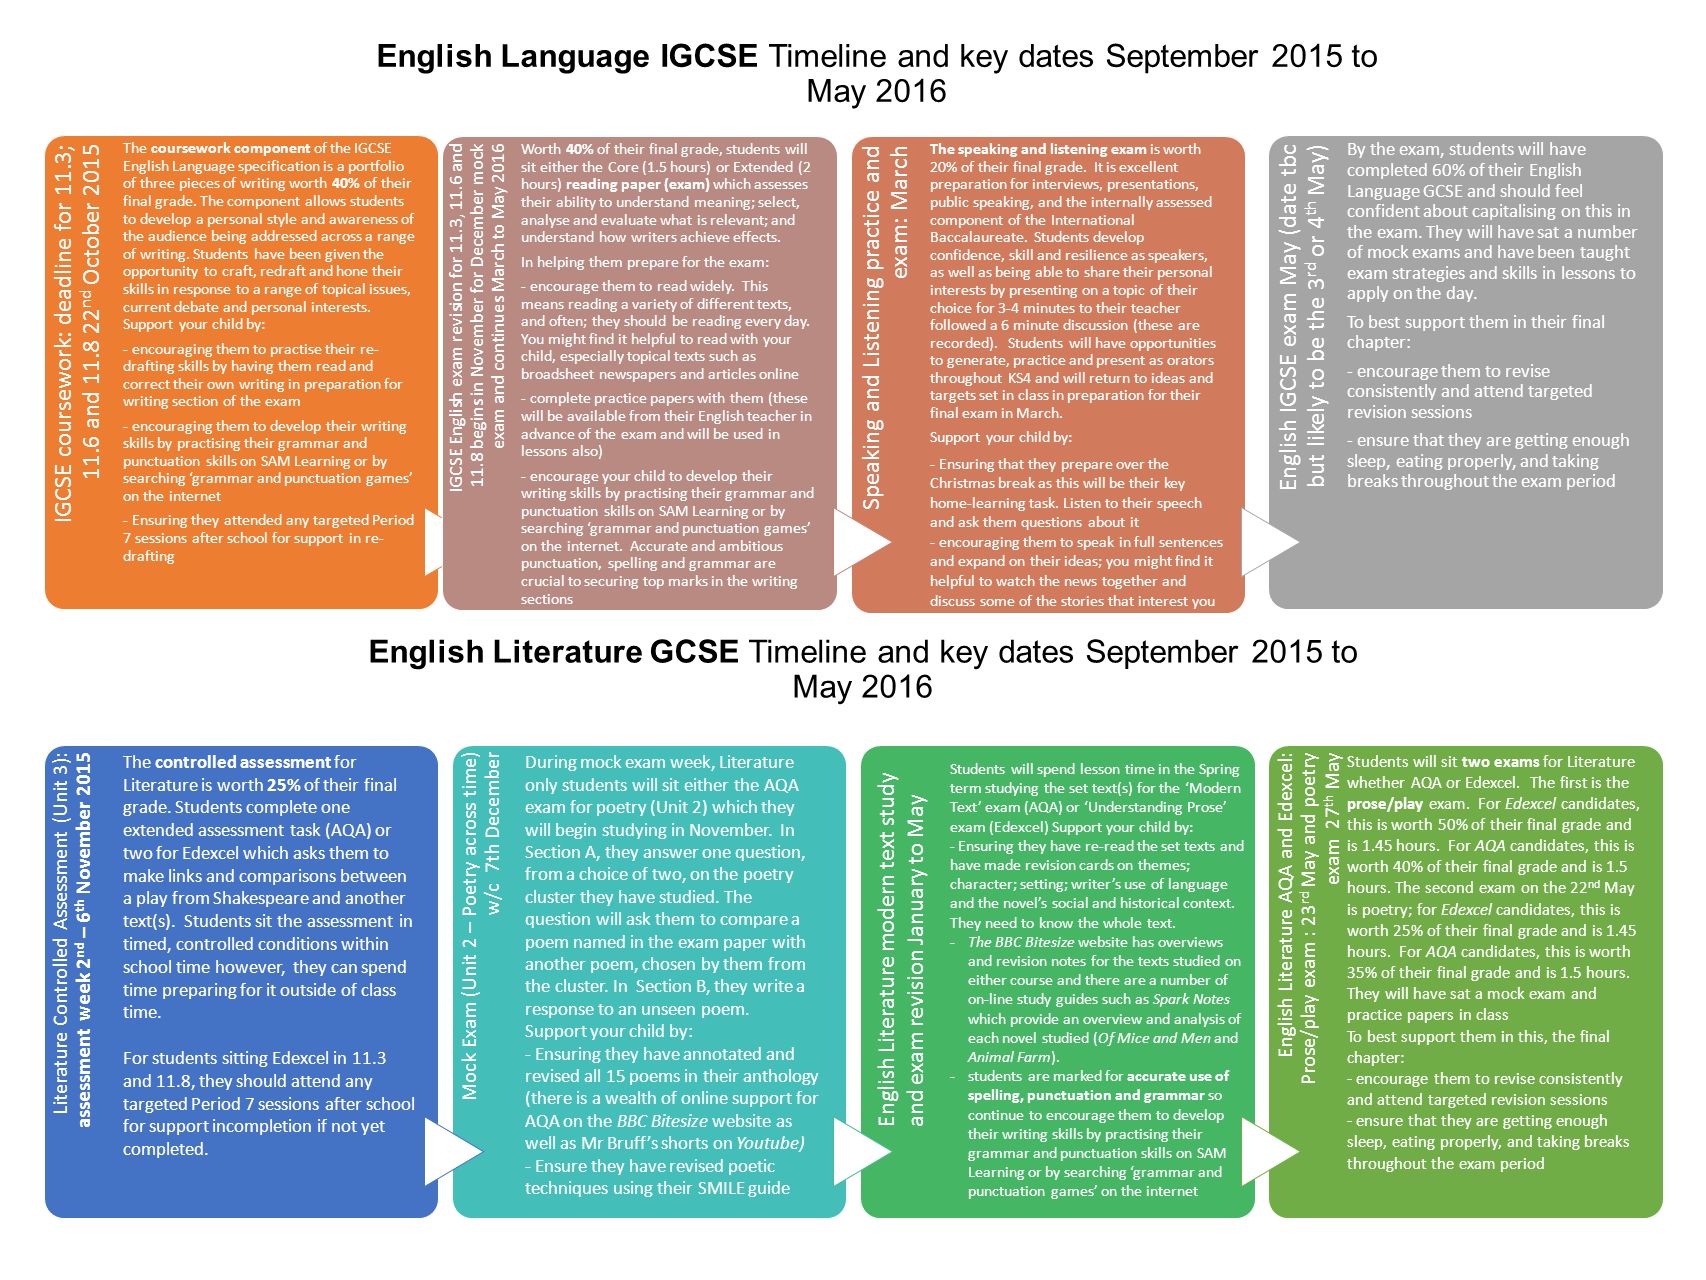 English Language IGCSE Timeline and key dates September 2015 to May 2016 IGCSE coursework: deadline for 11.3; 11.6 and nd October 2015 The coursework component of the IGCSE English Language specification is a portfolio of three pieces of writing worth 40% of their final grade.